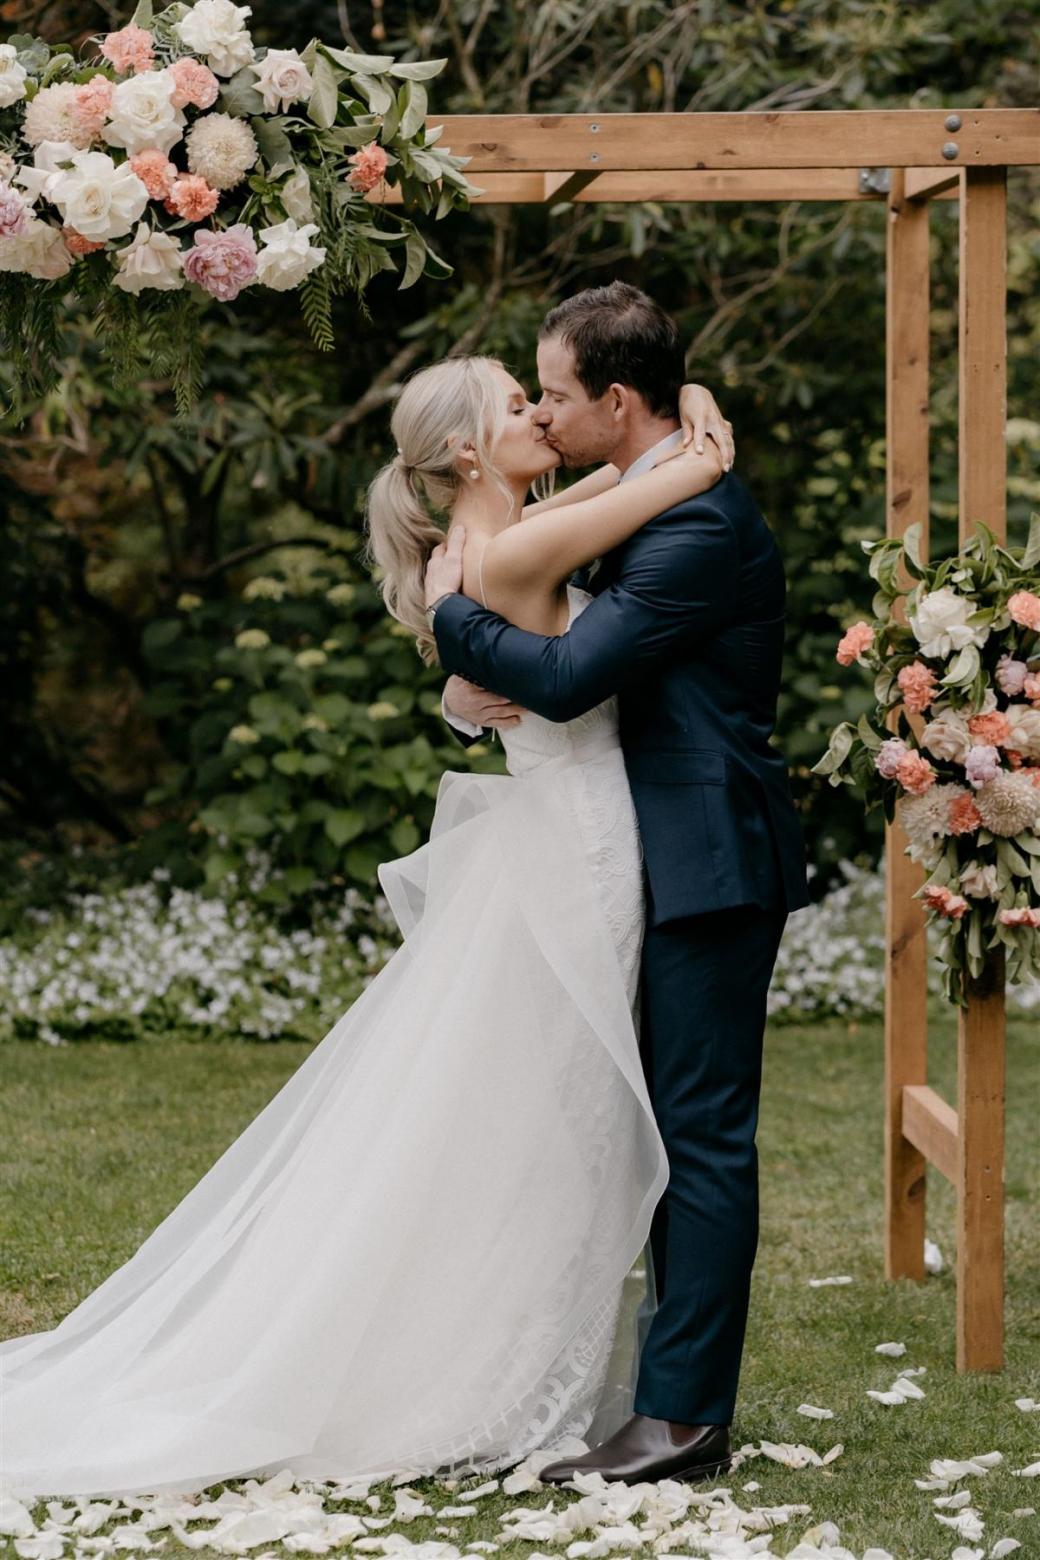 KWH bride Ashleigh and Adrian sharing a kiss at their country wedding; Ashleigh wears the dramatic Oval Trains with her Elodie gown by Karen Willis Holmes for ceremony look.